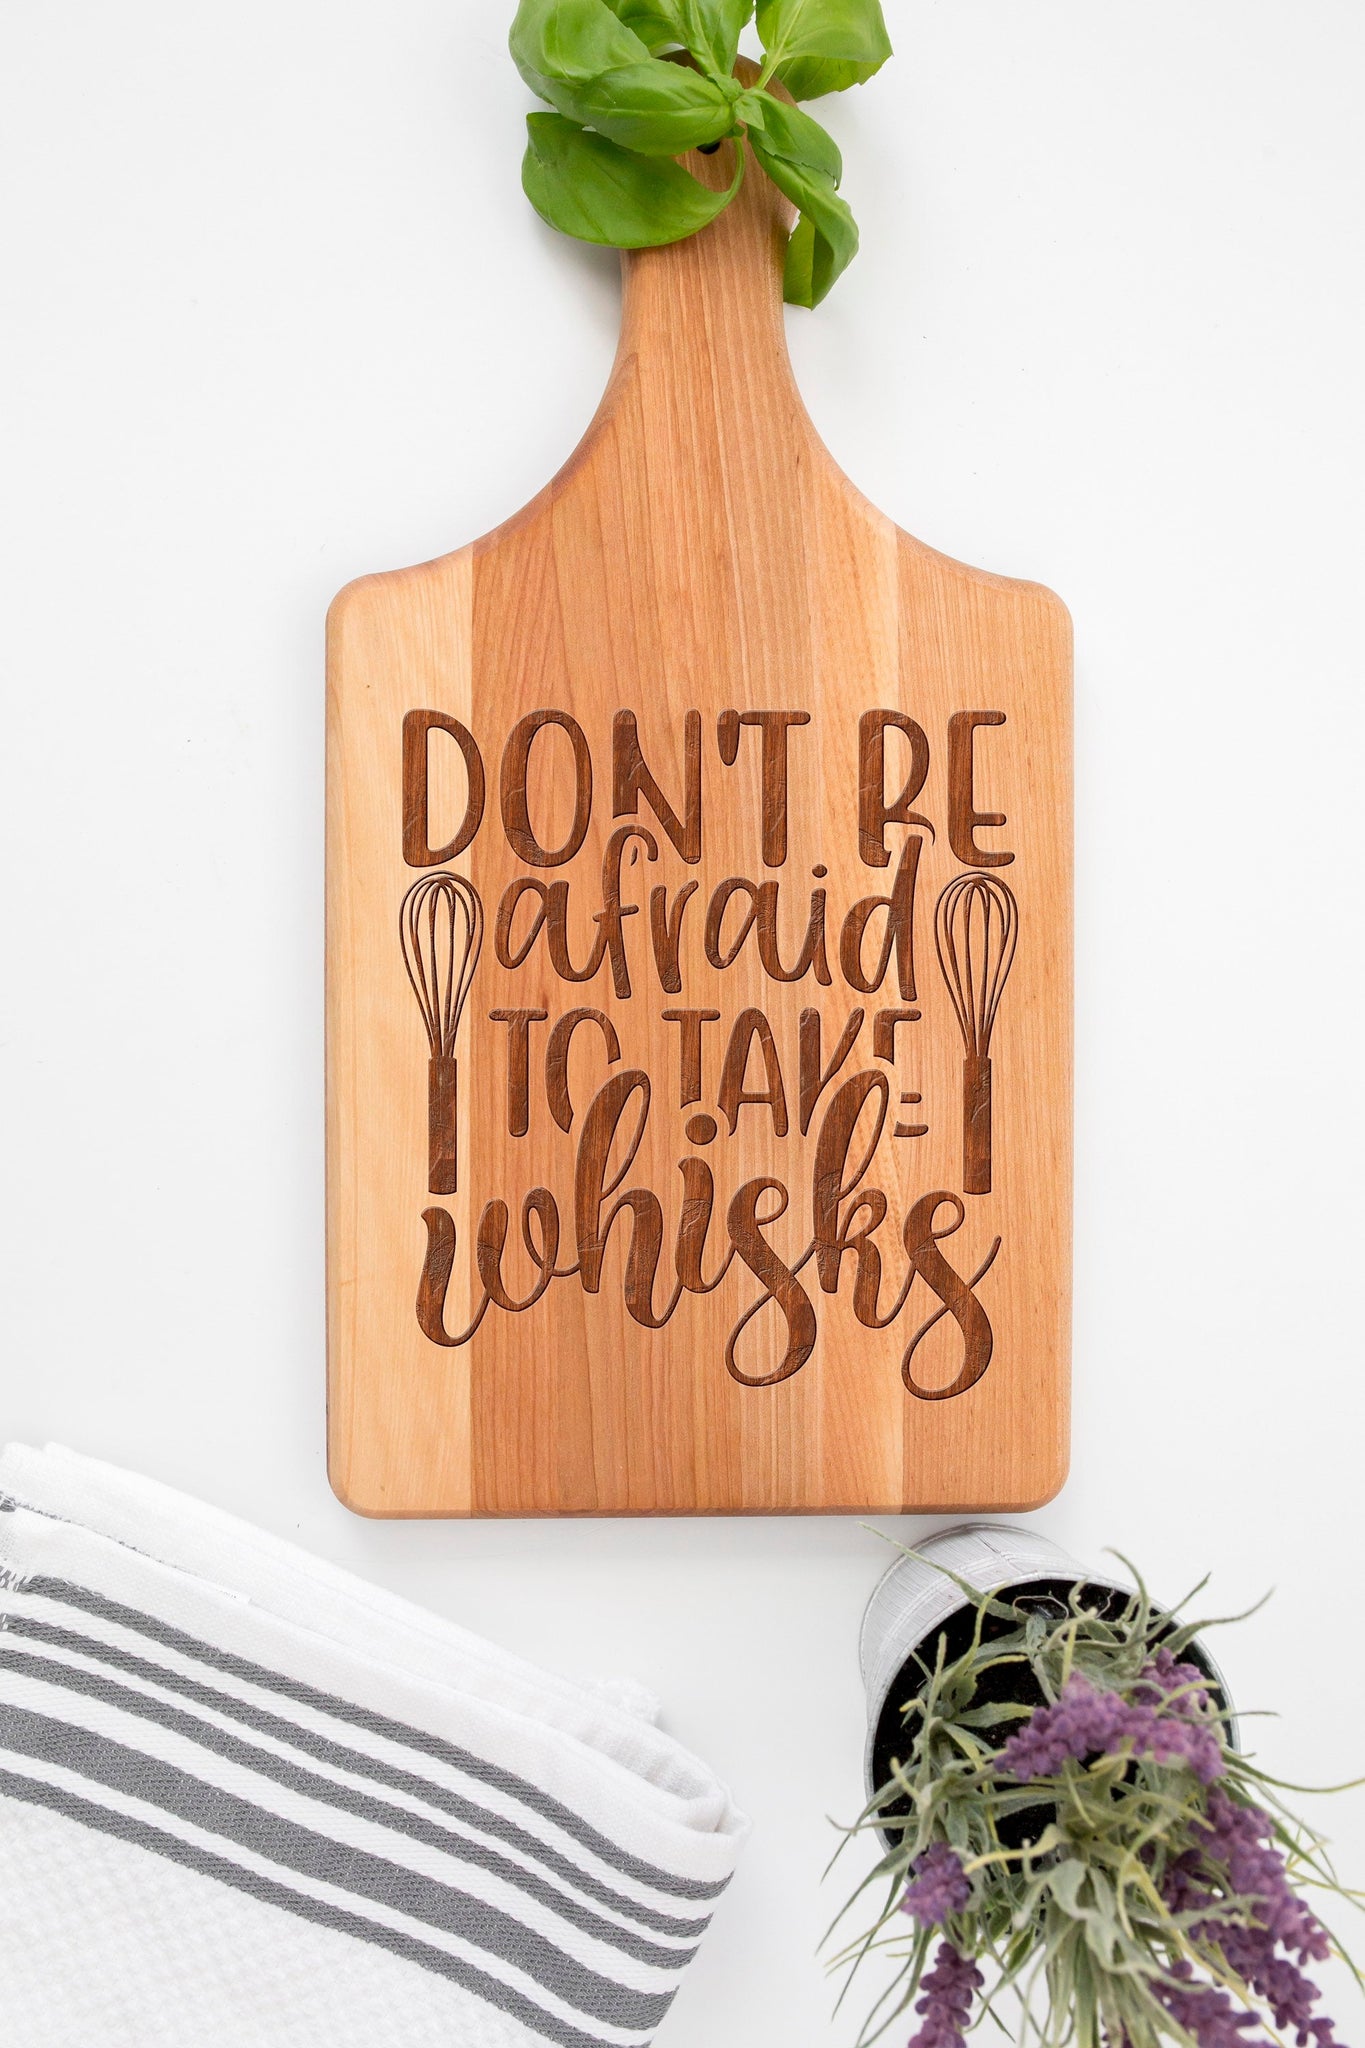 Punny Don’t Be Afraid To Take Whisks Funny Chopping Board Gift For Her, Kitchen Humor Silly Cutting Serving Board Gift For Chef